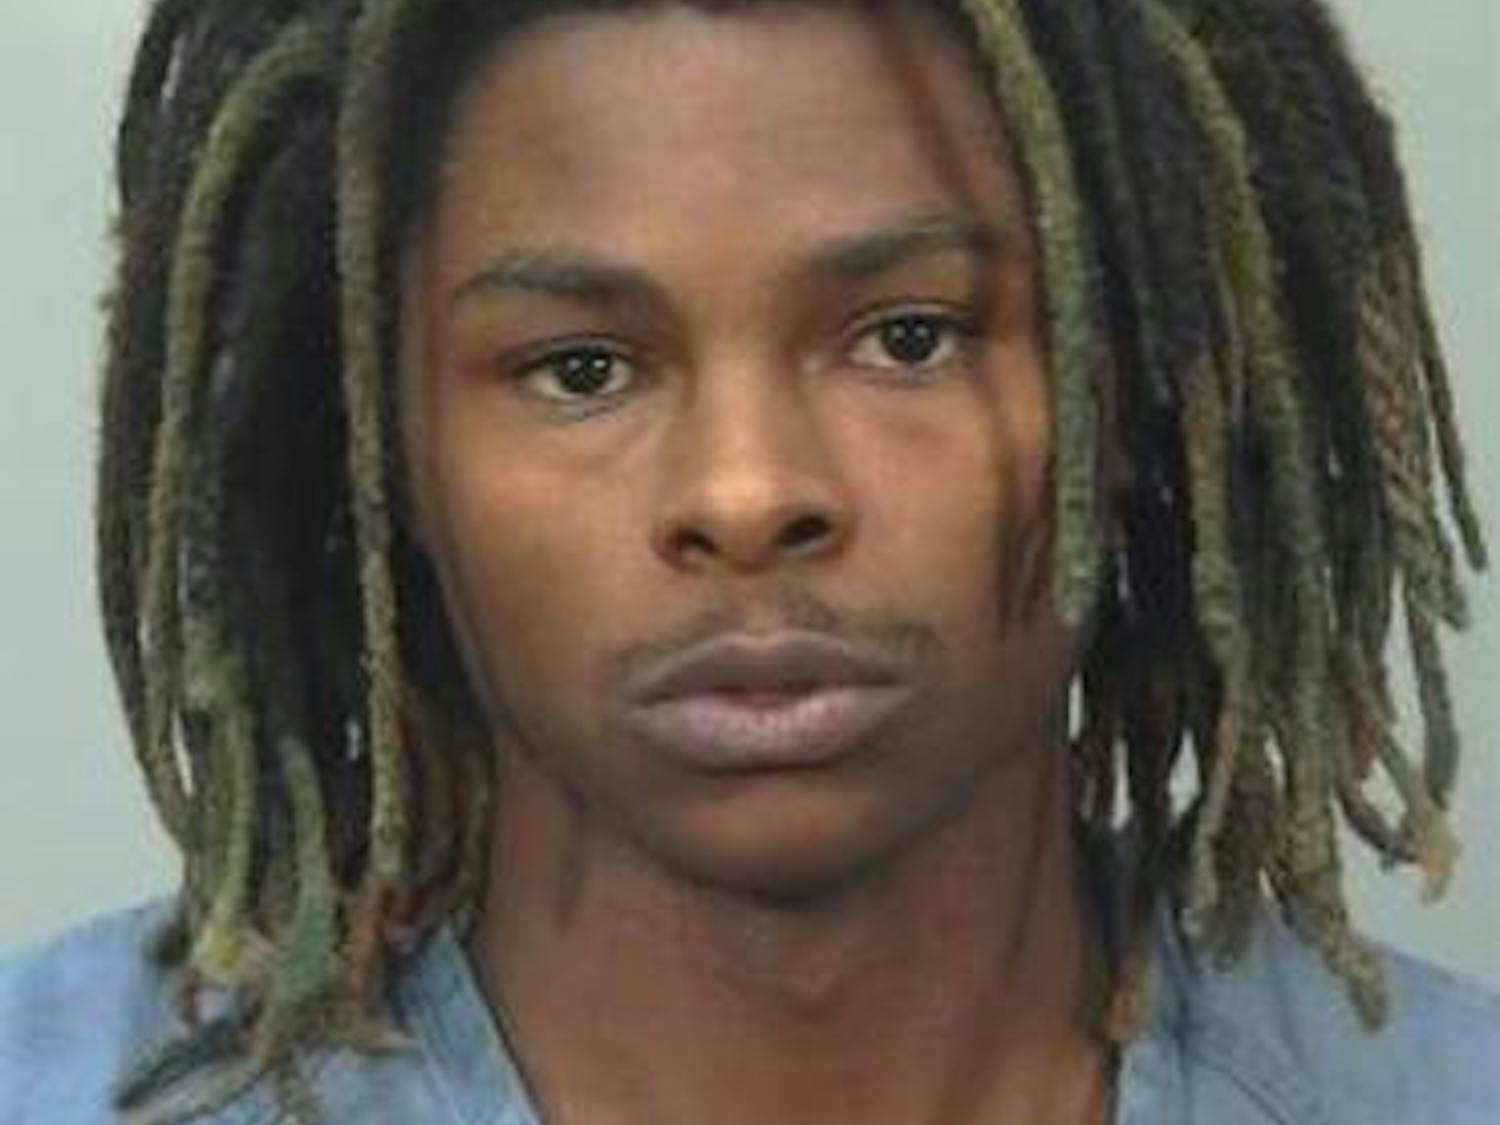 Xavier Davis, 20, is a suspect of gang activity and has multiple bench warrants.